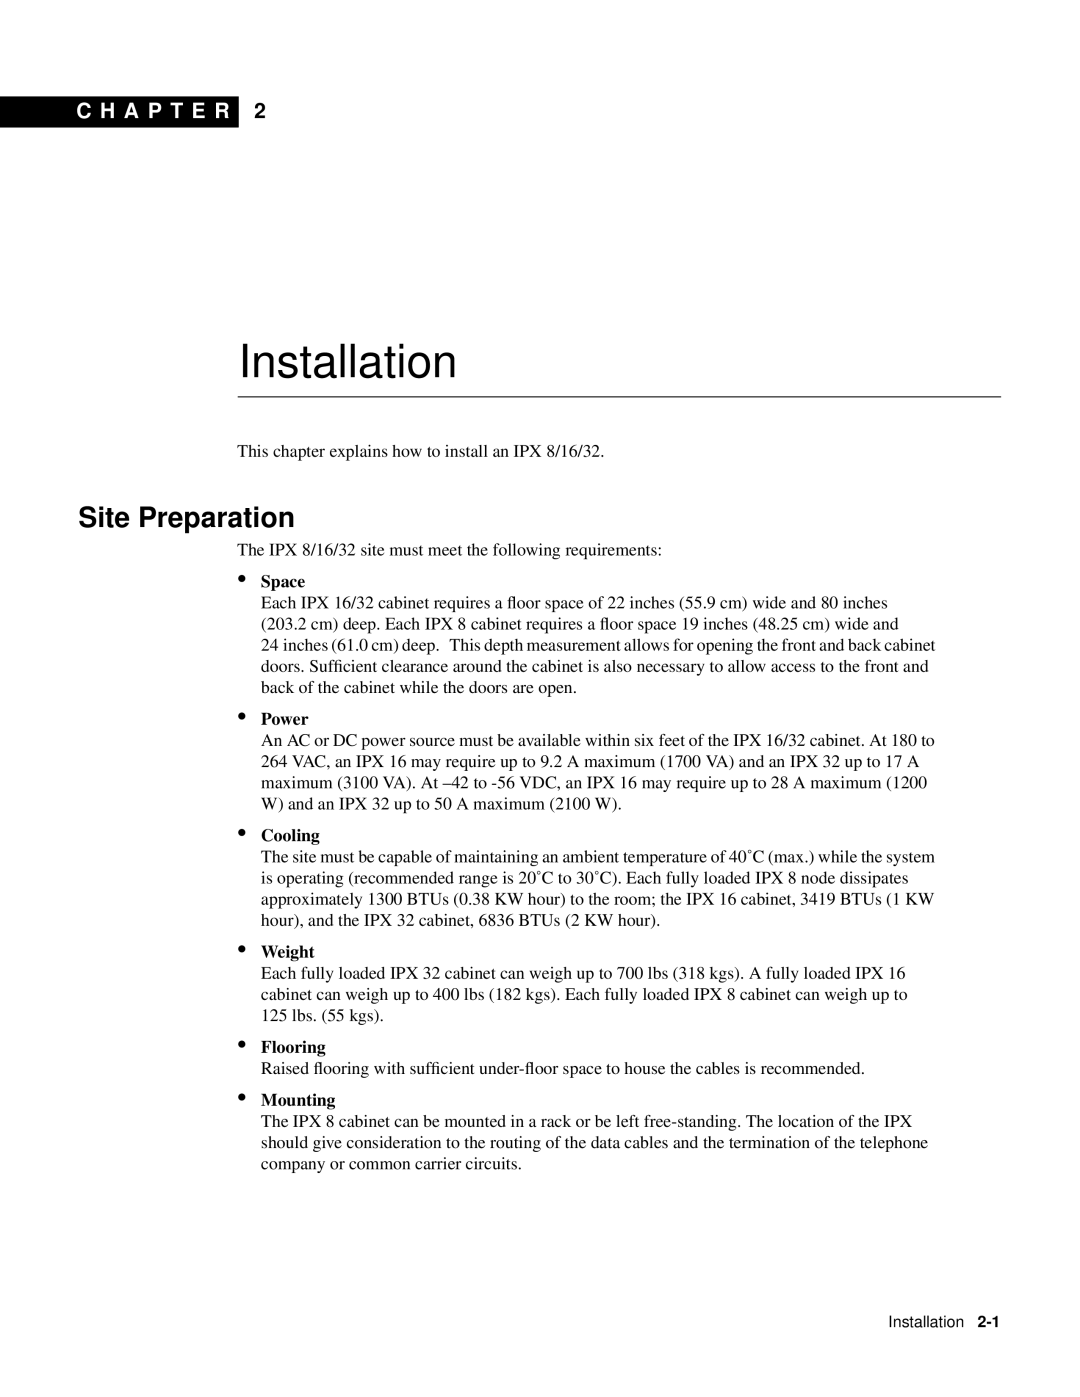 Cisco Systems BPX 8600 Series manual Site Preparation, Installation, C H A P T E R, Space, Power, Cooling, Weight 